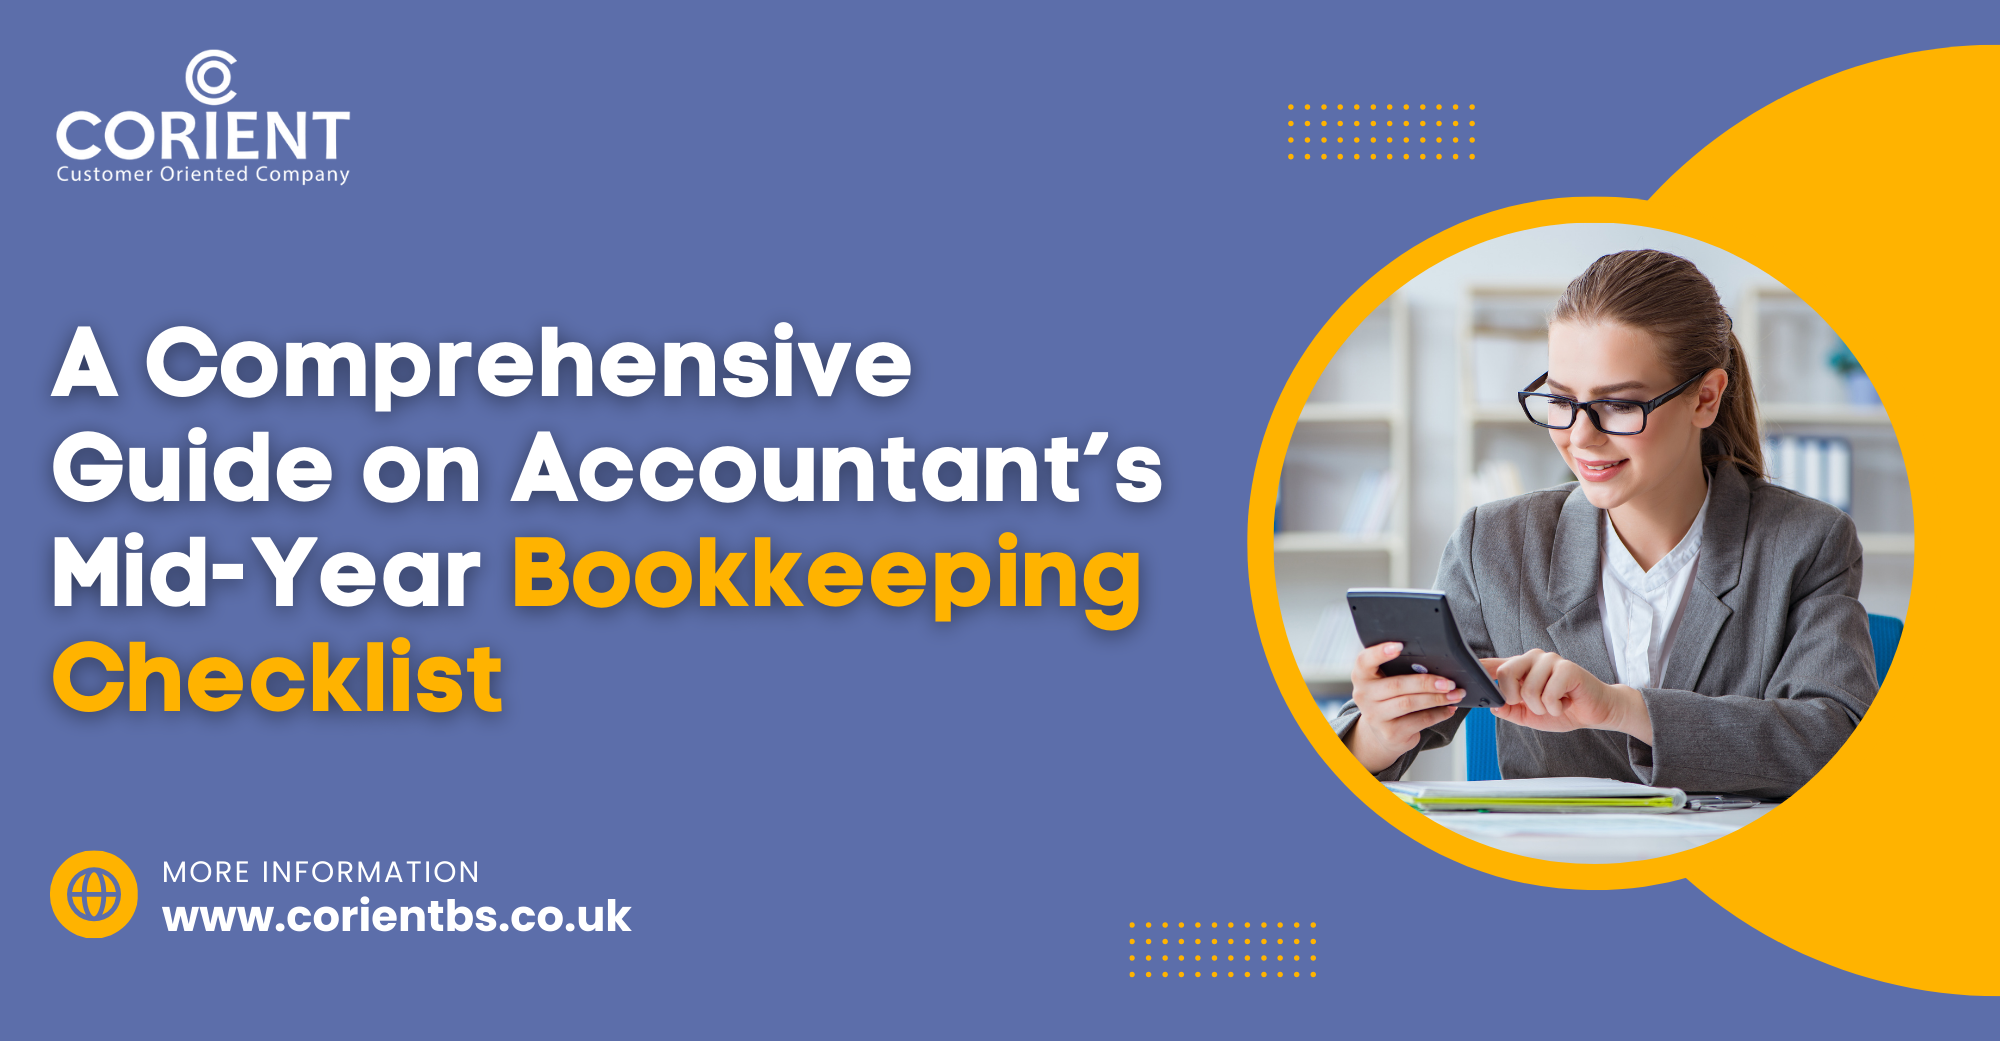 A Comprehensive Guide on Accountant’s Mid-Year Bookkeeping Checklist